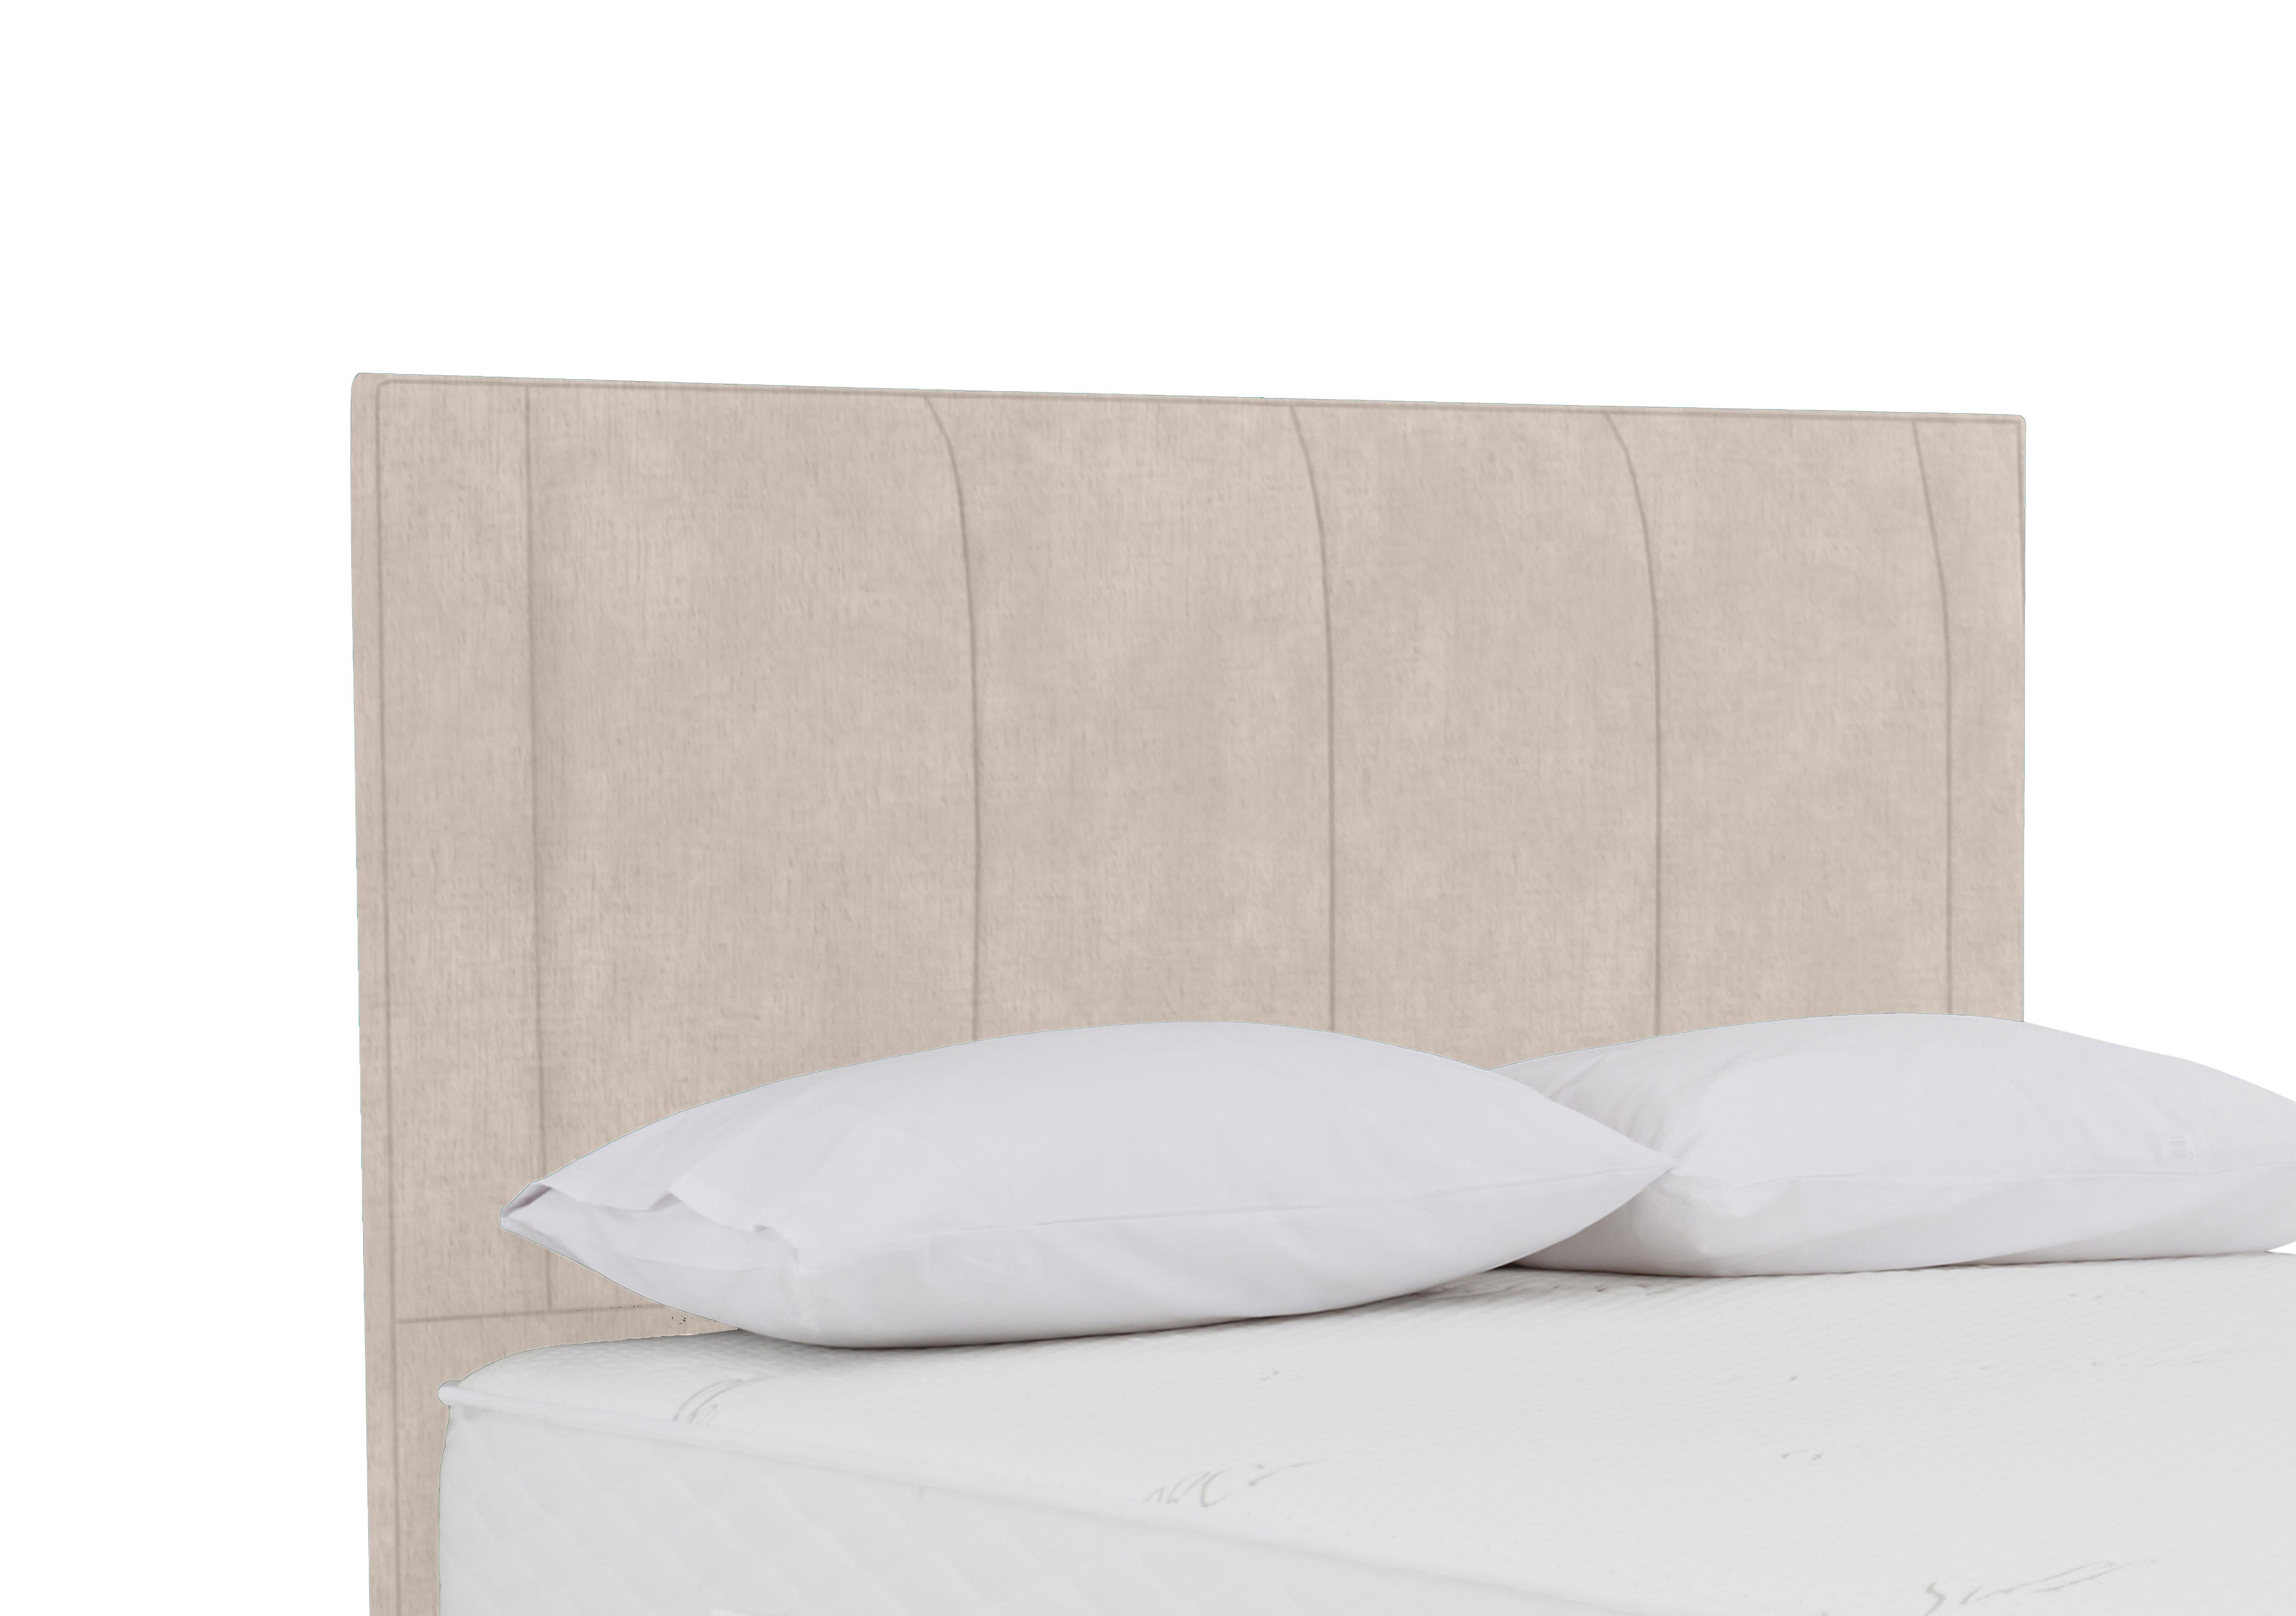 Orwell Floor Standing Headboard in Lace Ivory on Furniture Village